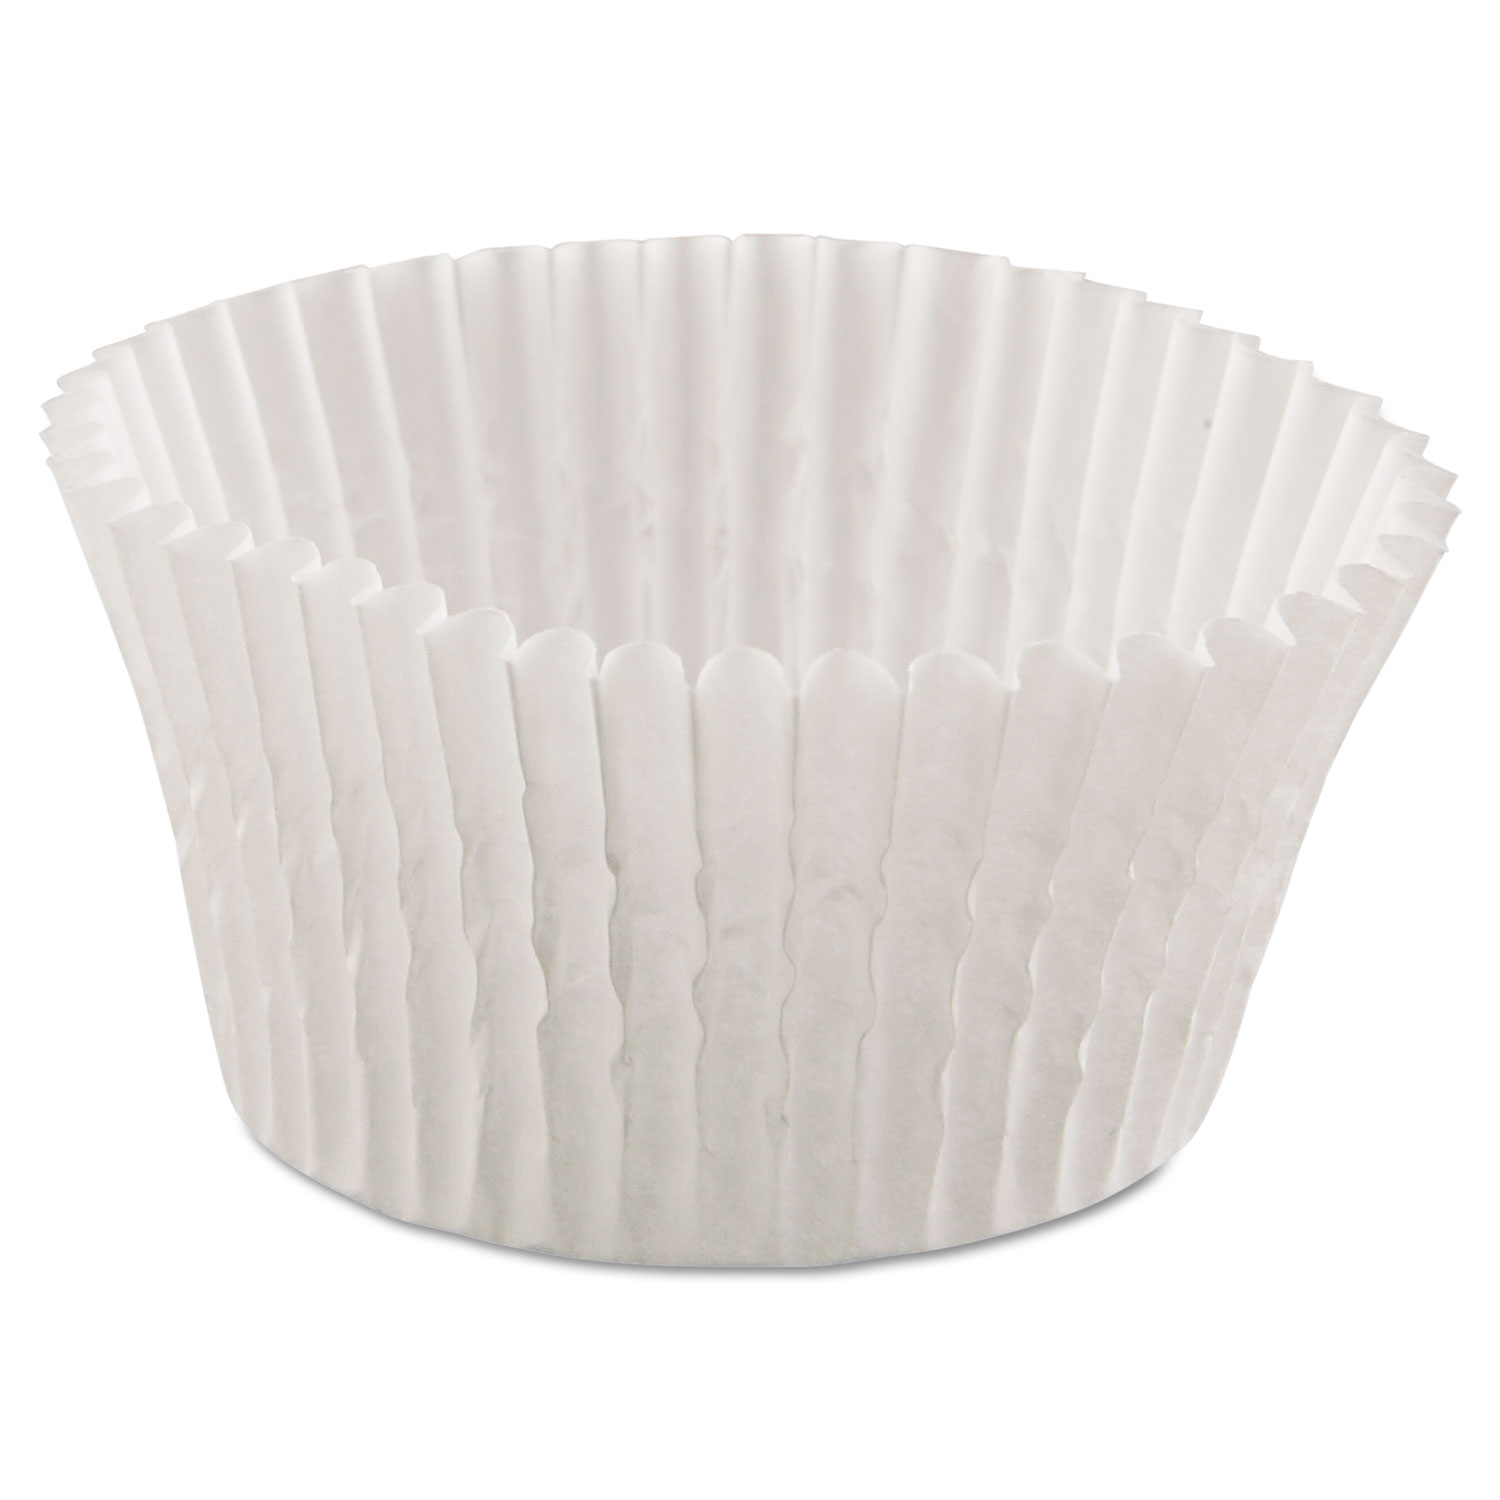  Hoffmaster 610032 Fluted Bake Cups, 4 1/2 dia x 1 1/4h, White, 500/Pack, 20 Pack/Carton (HFM610032) 